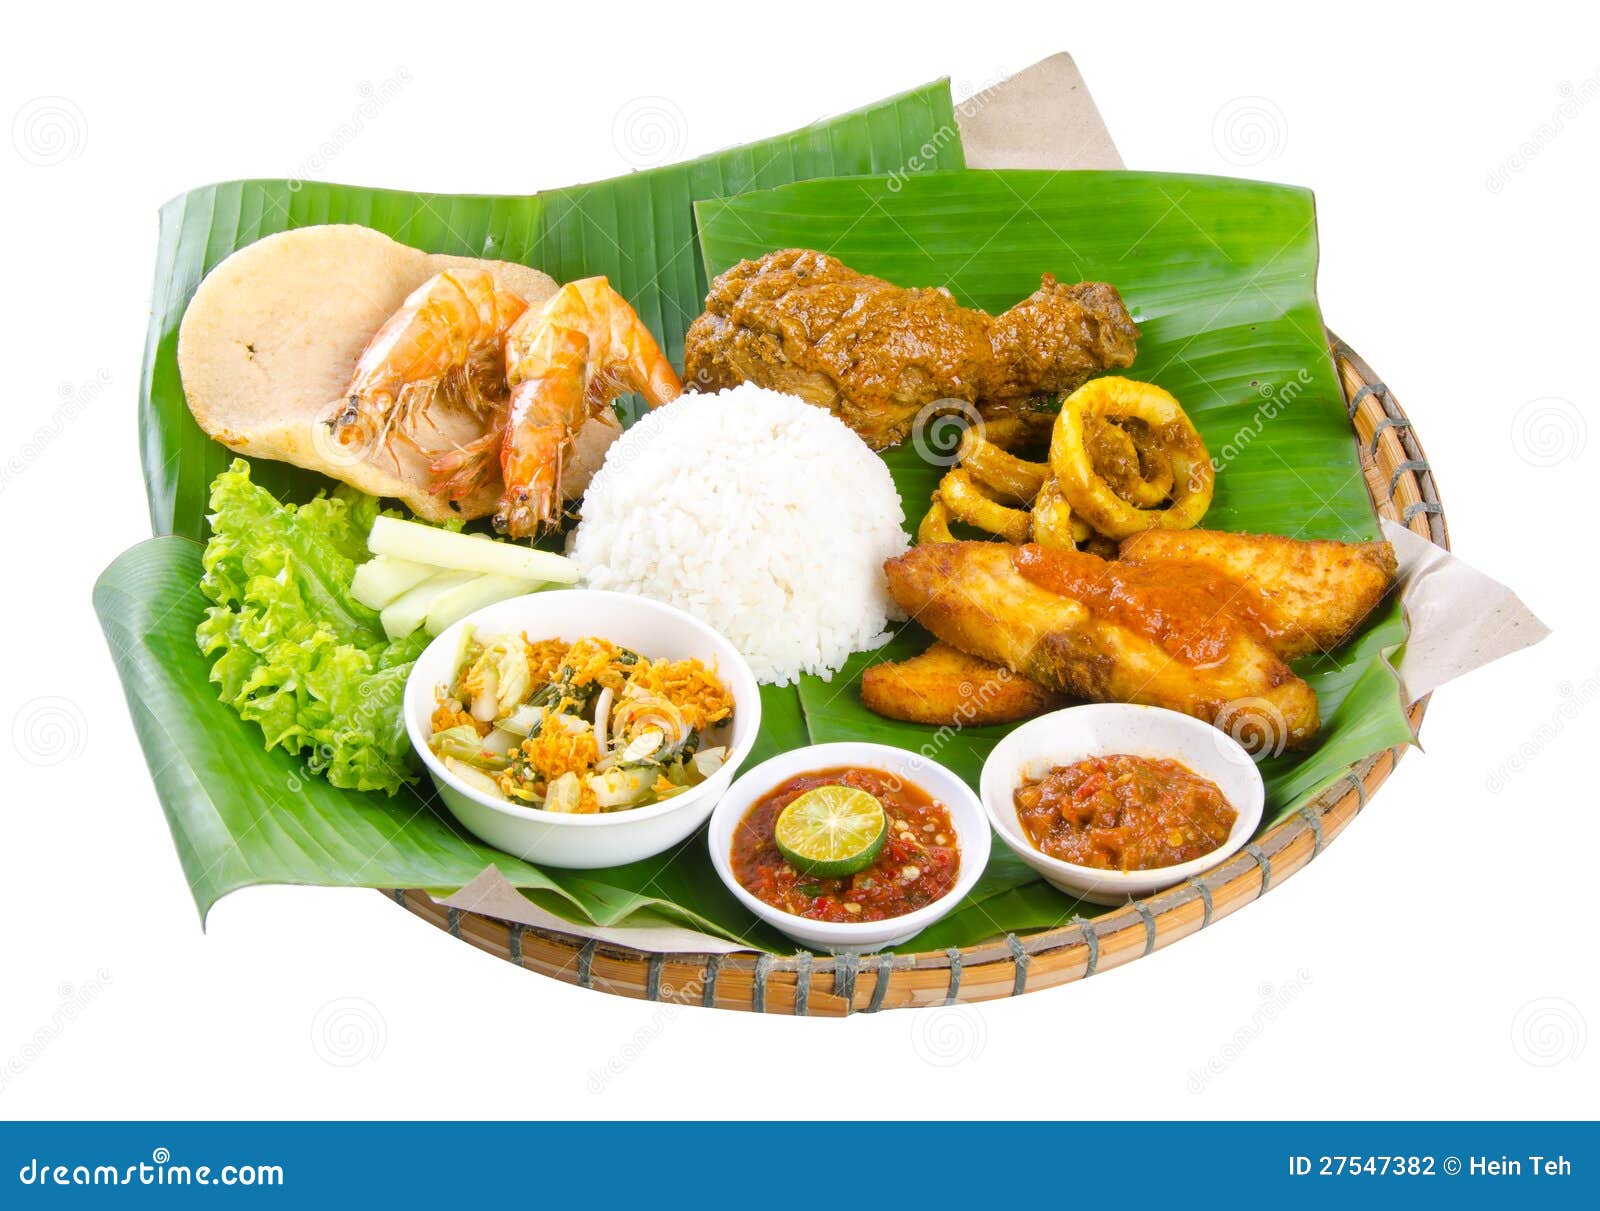 Indonesian Food, Chicken, Fish And Vegetables Stock Photo  Image: 27547382